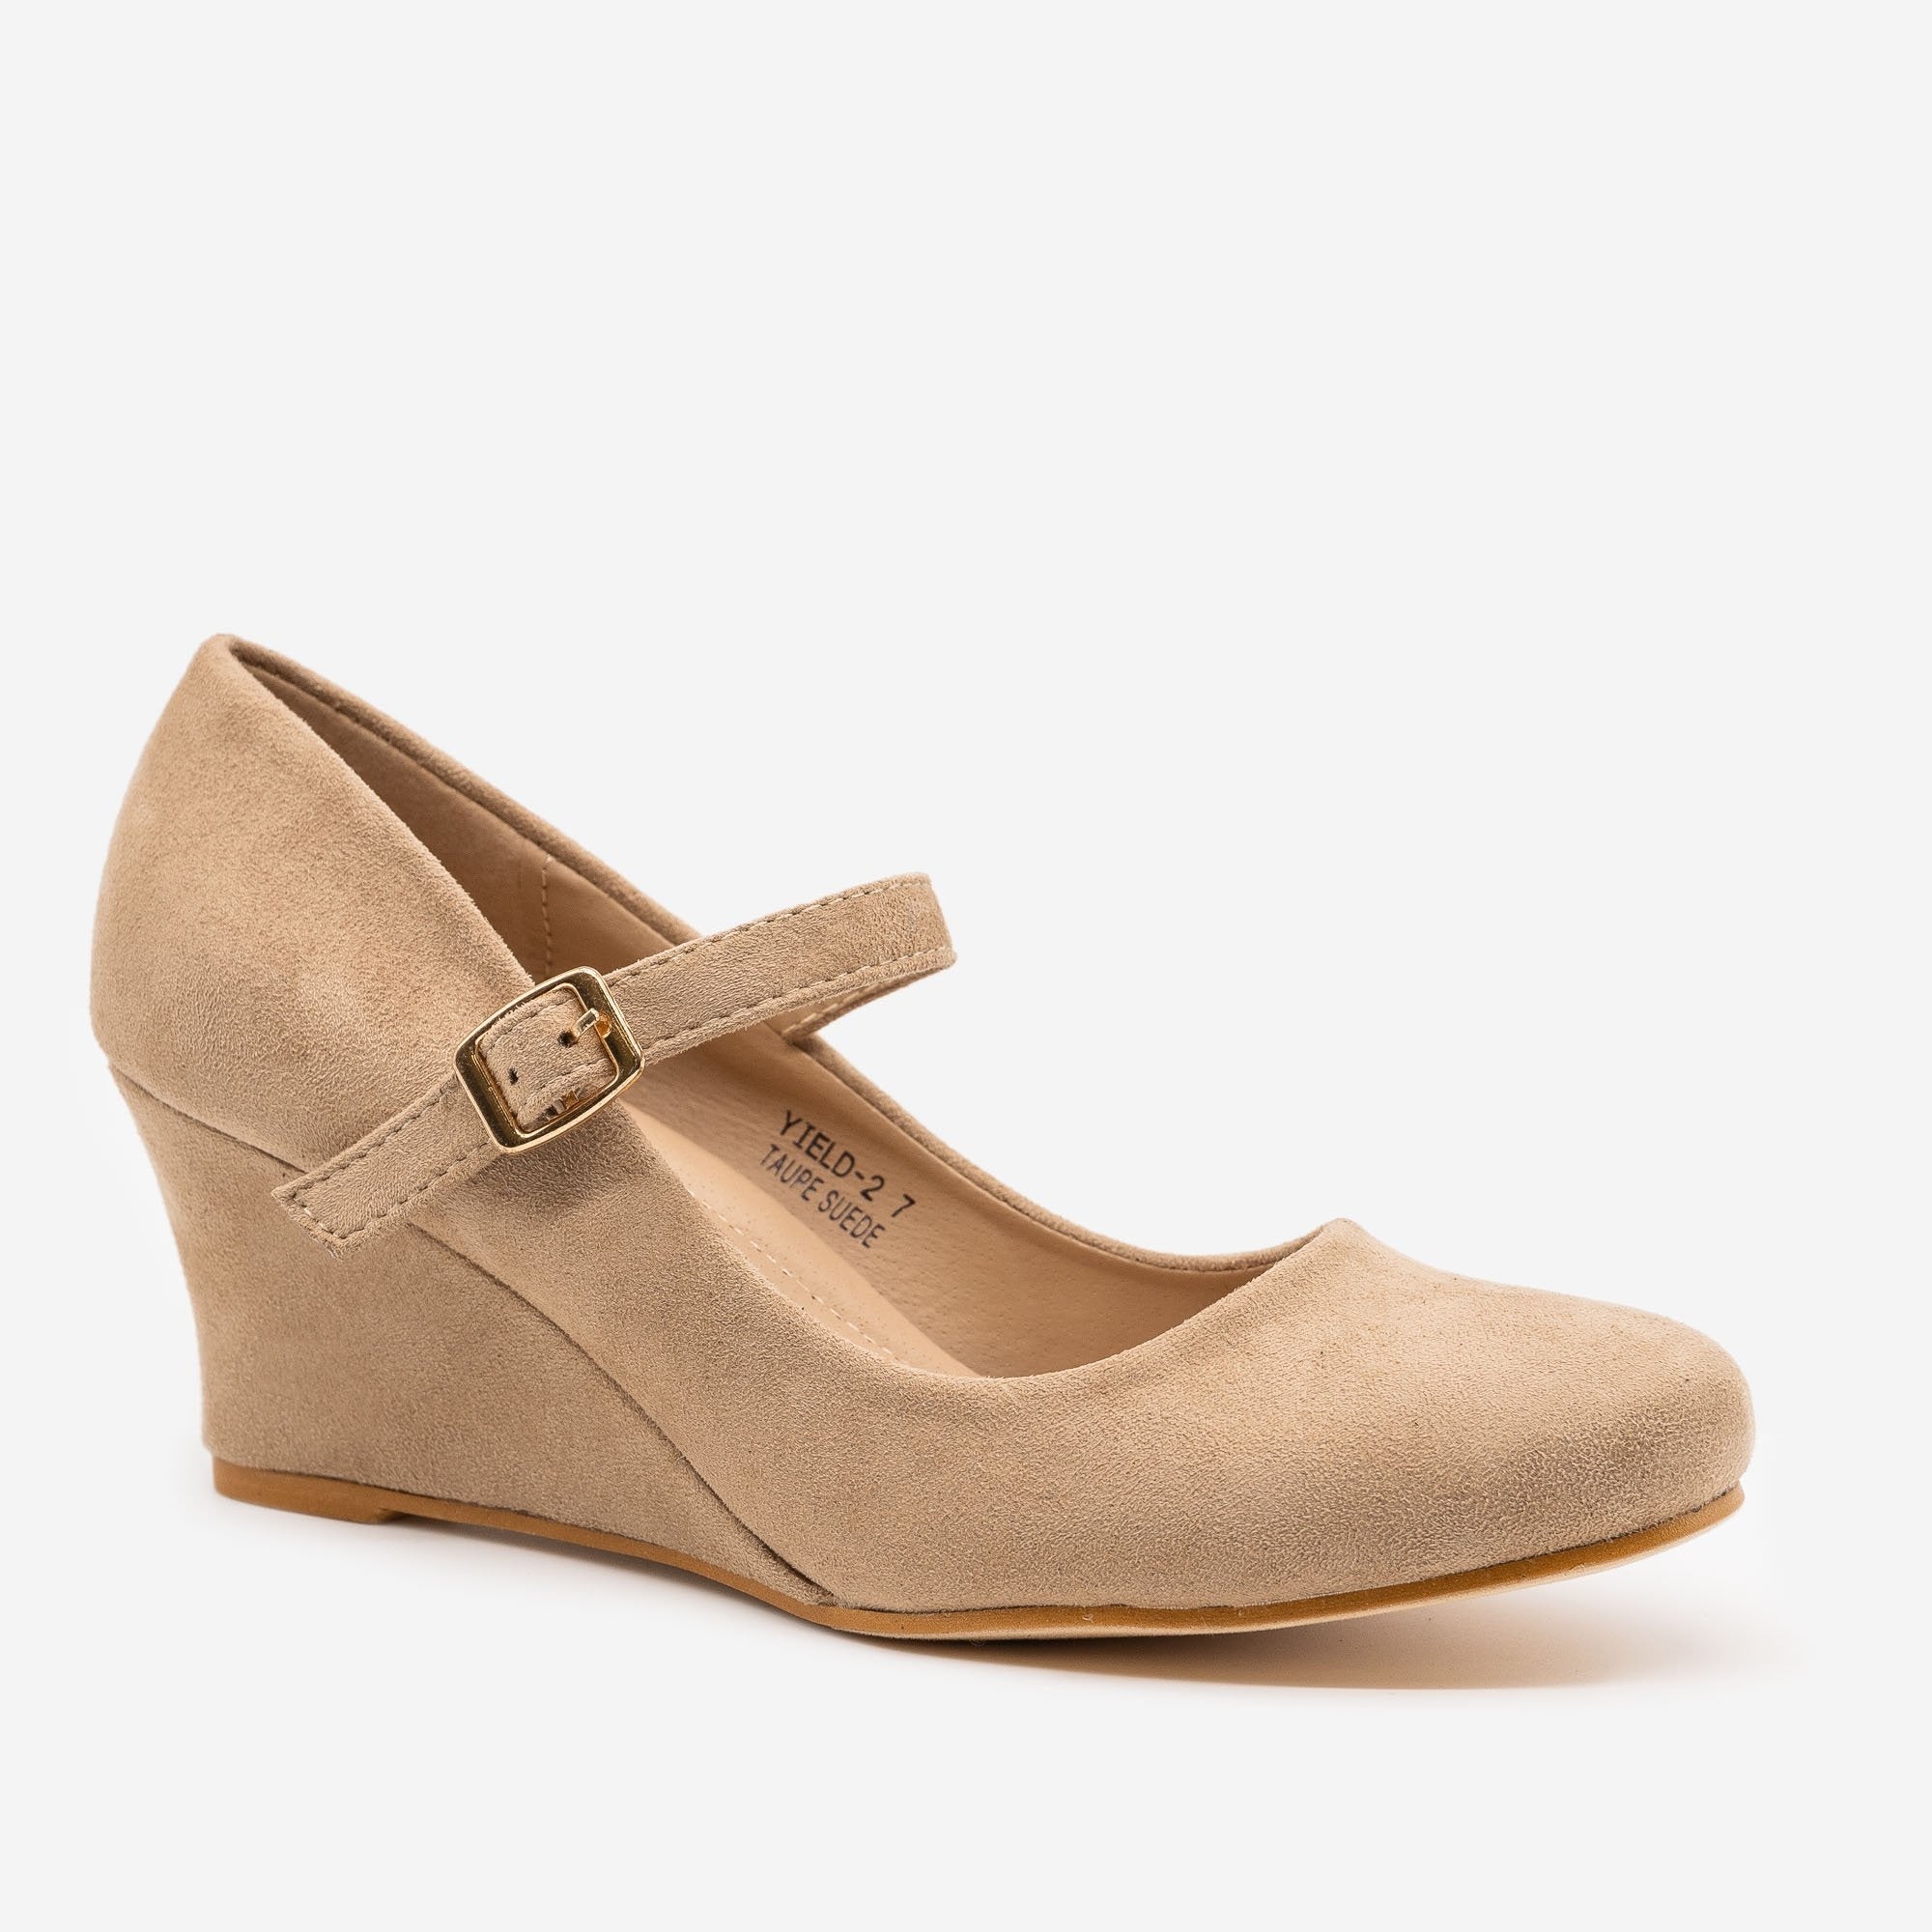 mary jane wedge shoes